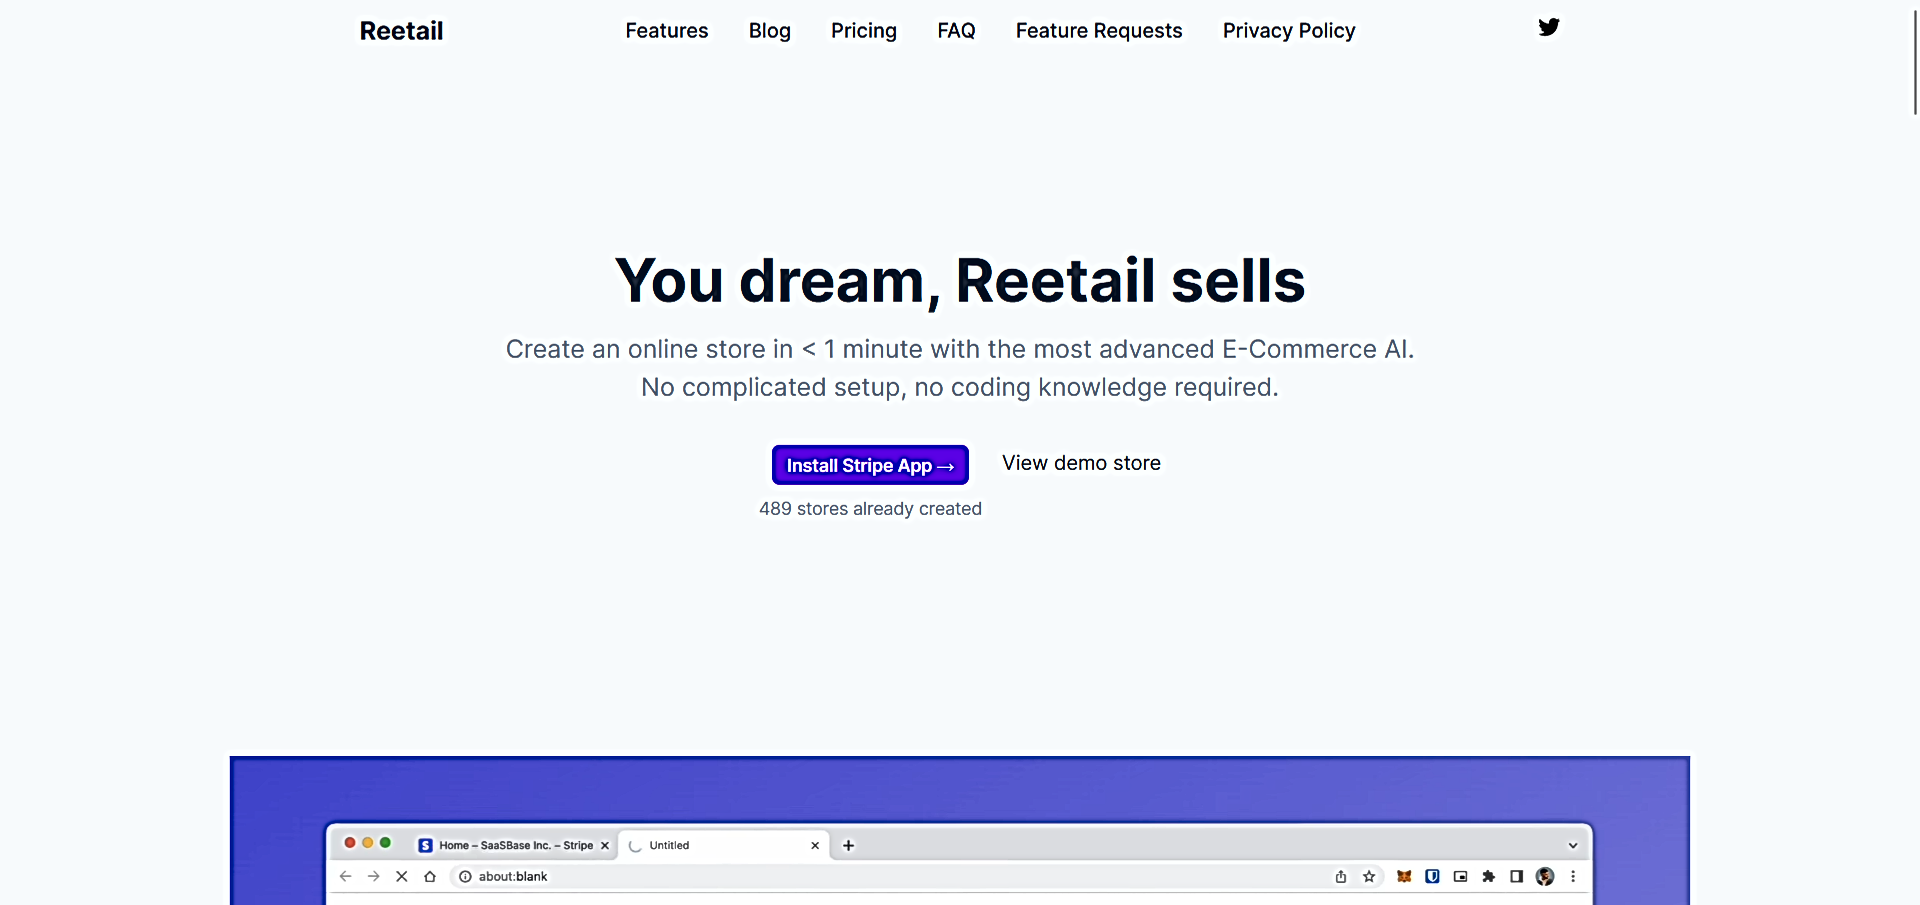 Reetail featured